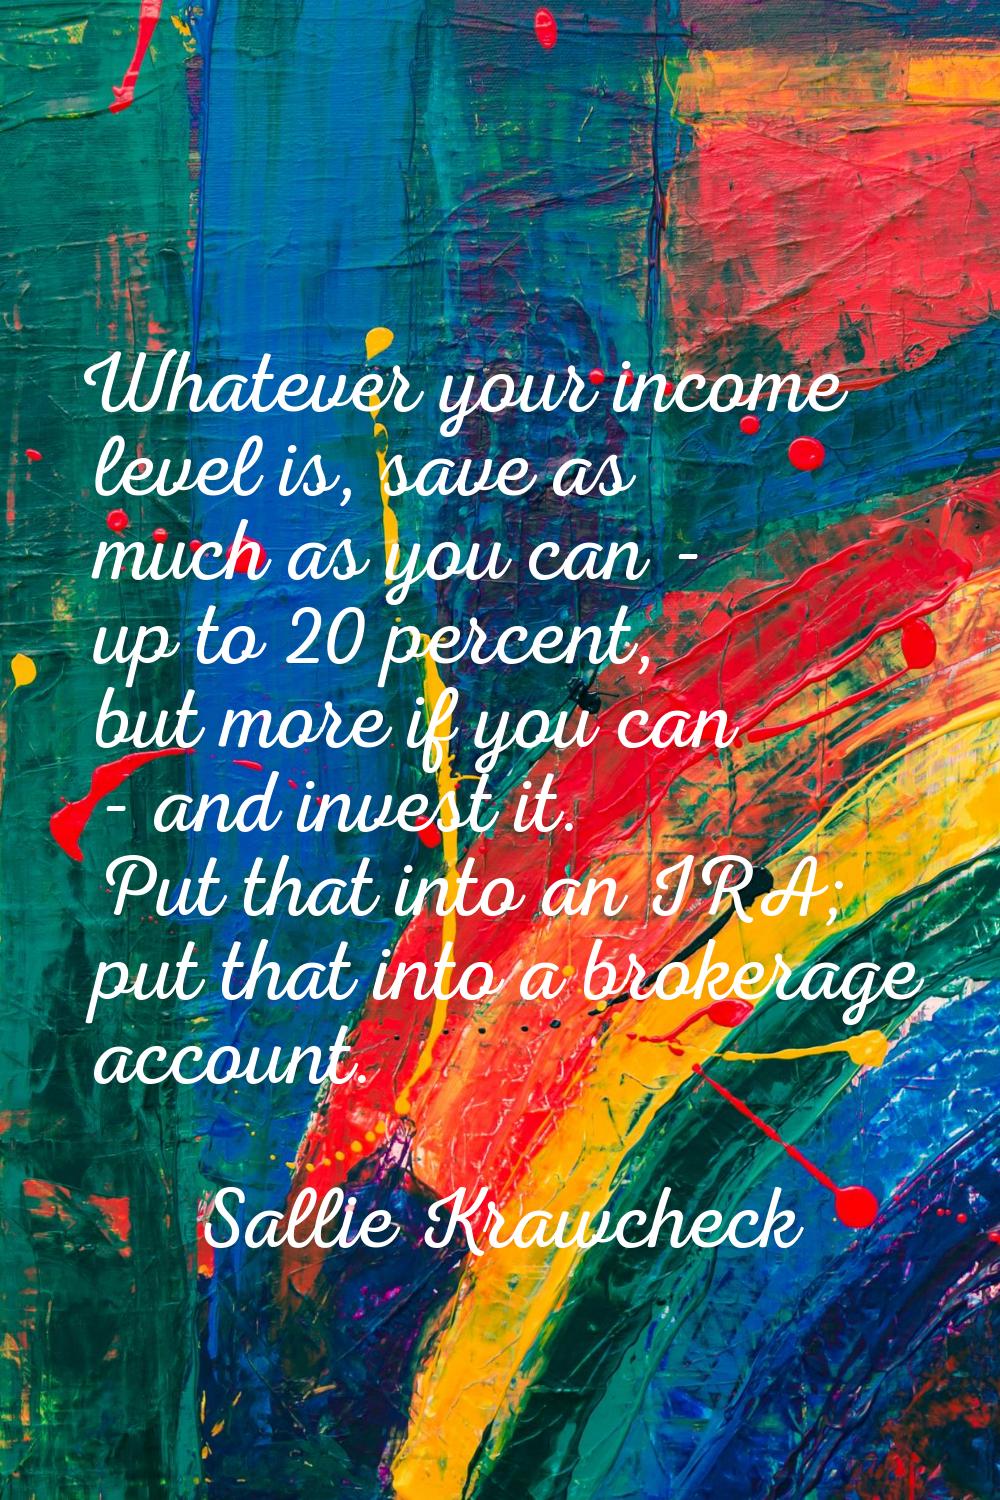 Whatever your income level is, save as much as you can - up to 20 percent, but more if you can - an